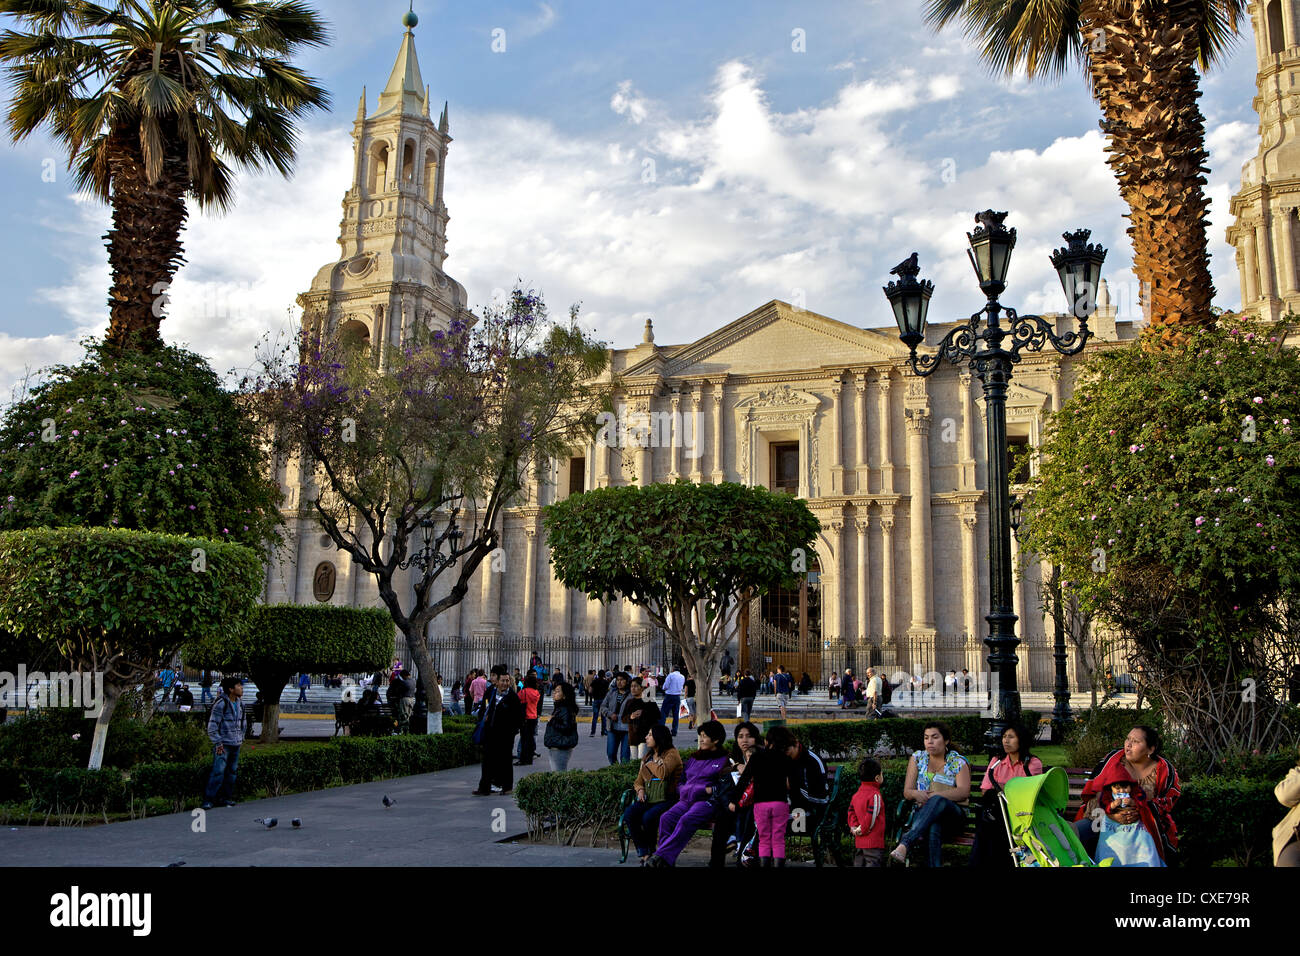 Plaza de Armas, Arequipa Cathedral in background, Arequipa, peru, South America Stock Photo